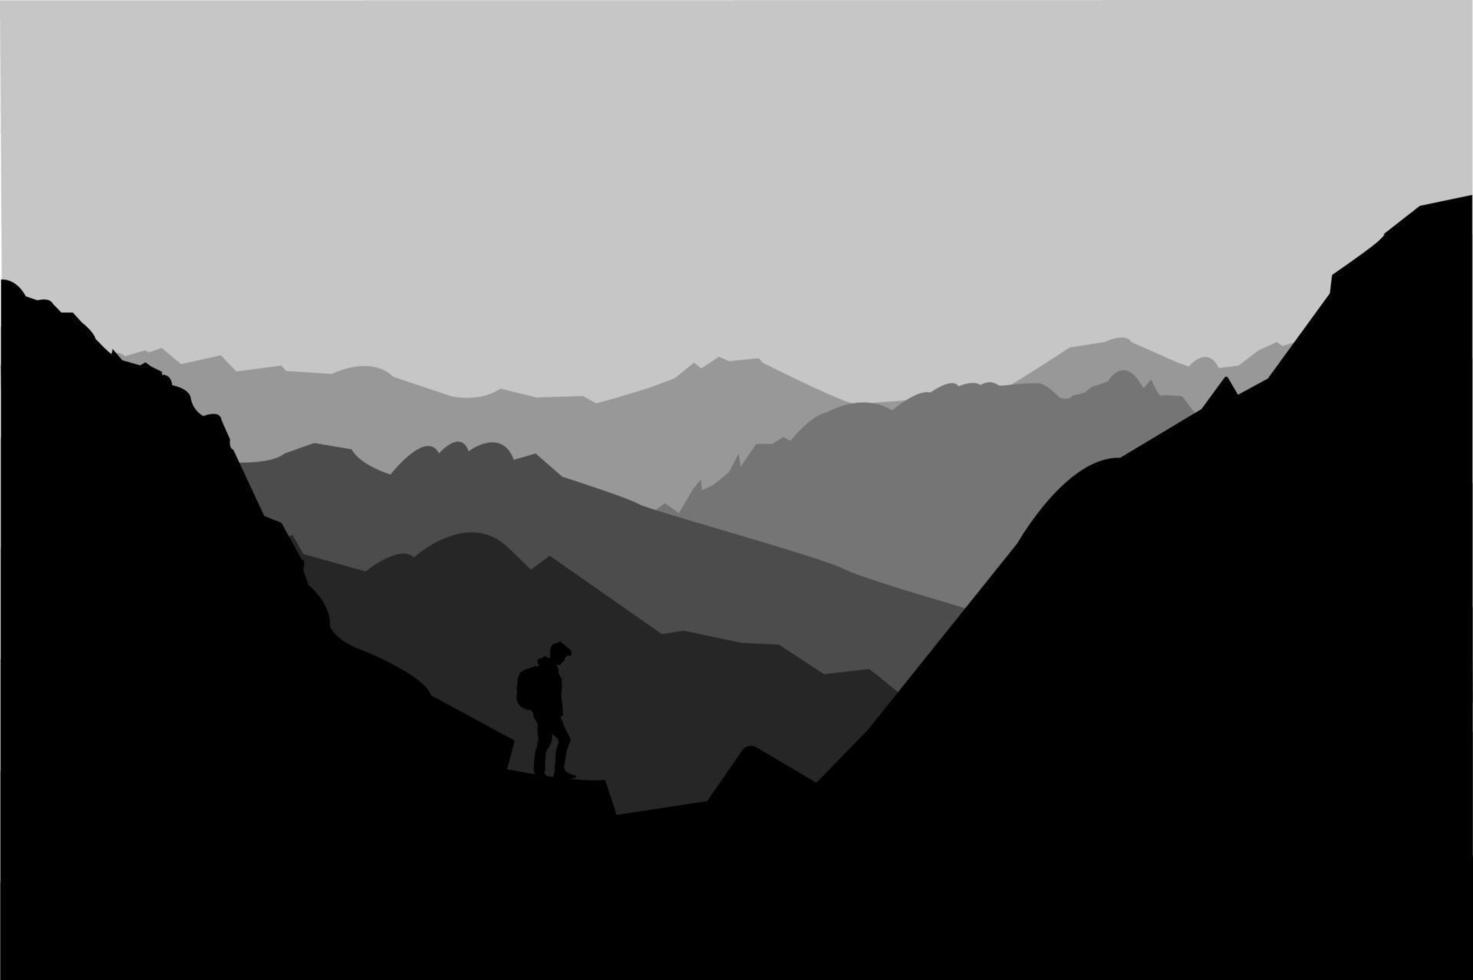 mountain outlines in black and white vector